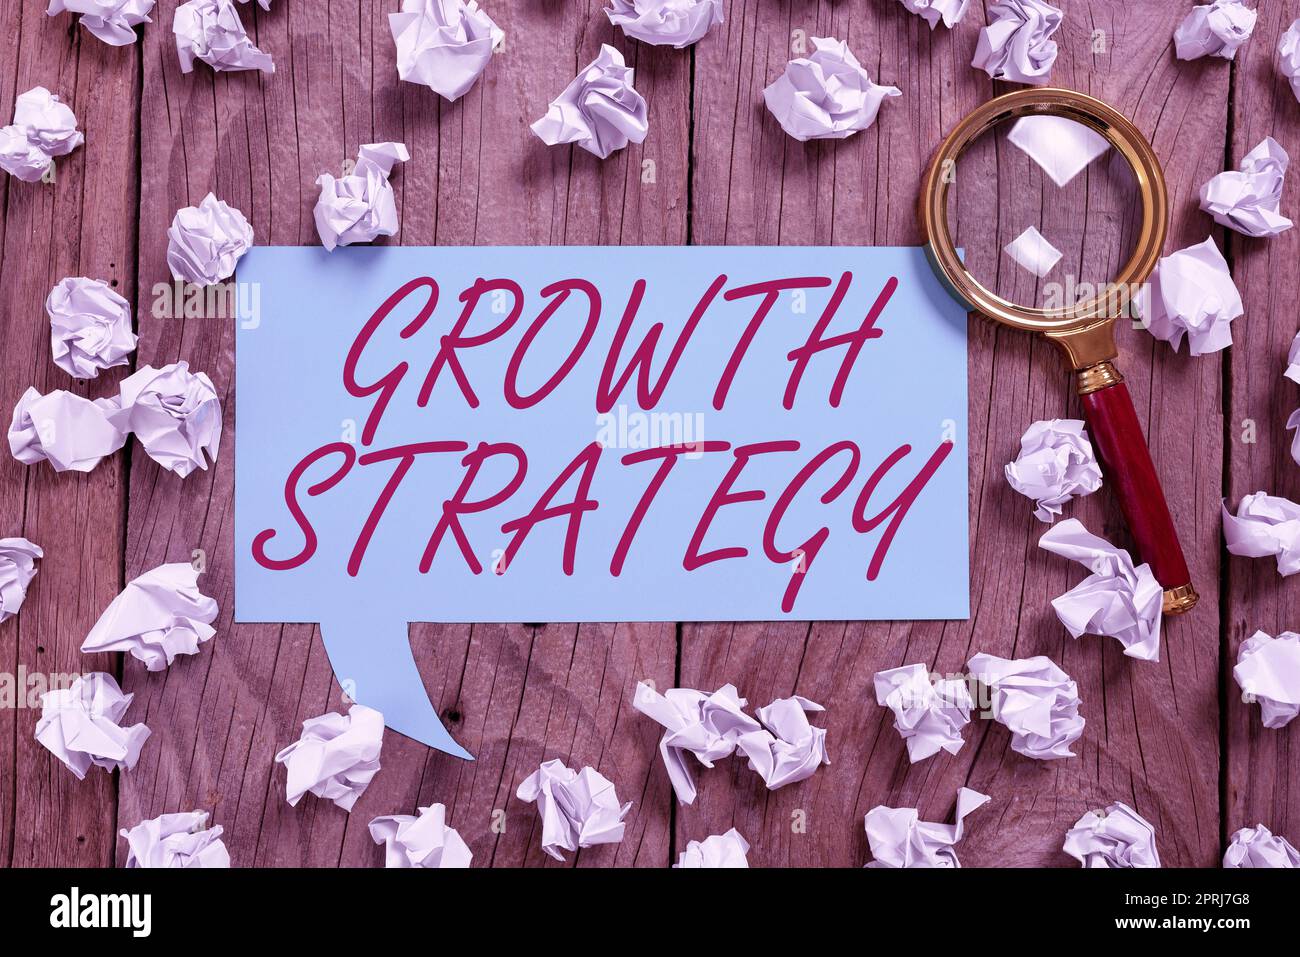 Text caption presenting Growth StrategyStrategy aimed at winning larger market share in short-term. Business concept Strategy aimed at winning larger market share in shortterm Stock Photo